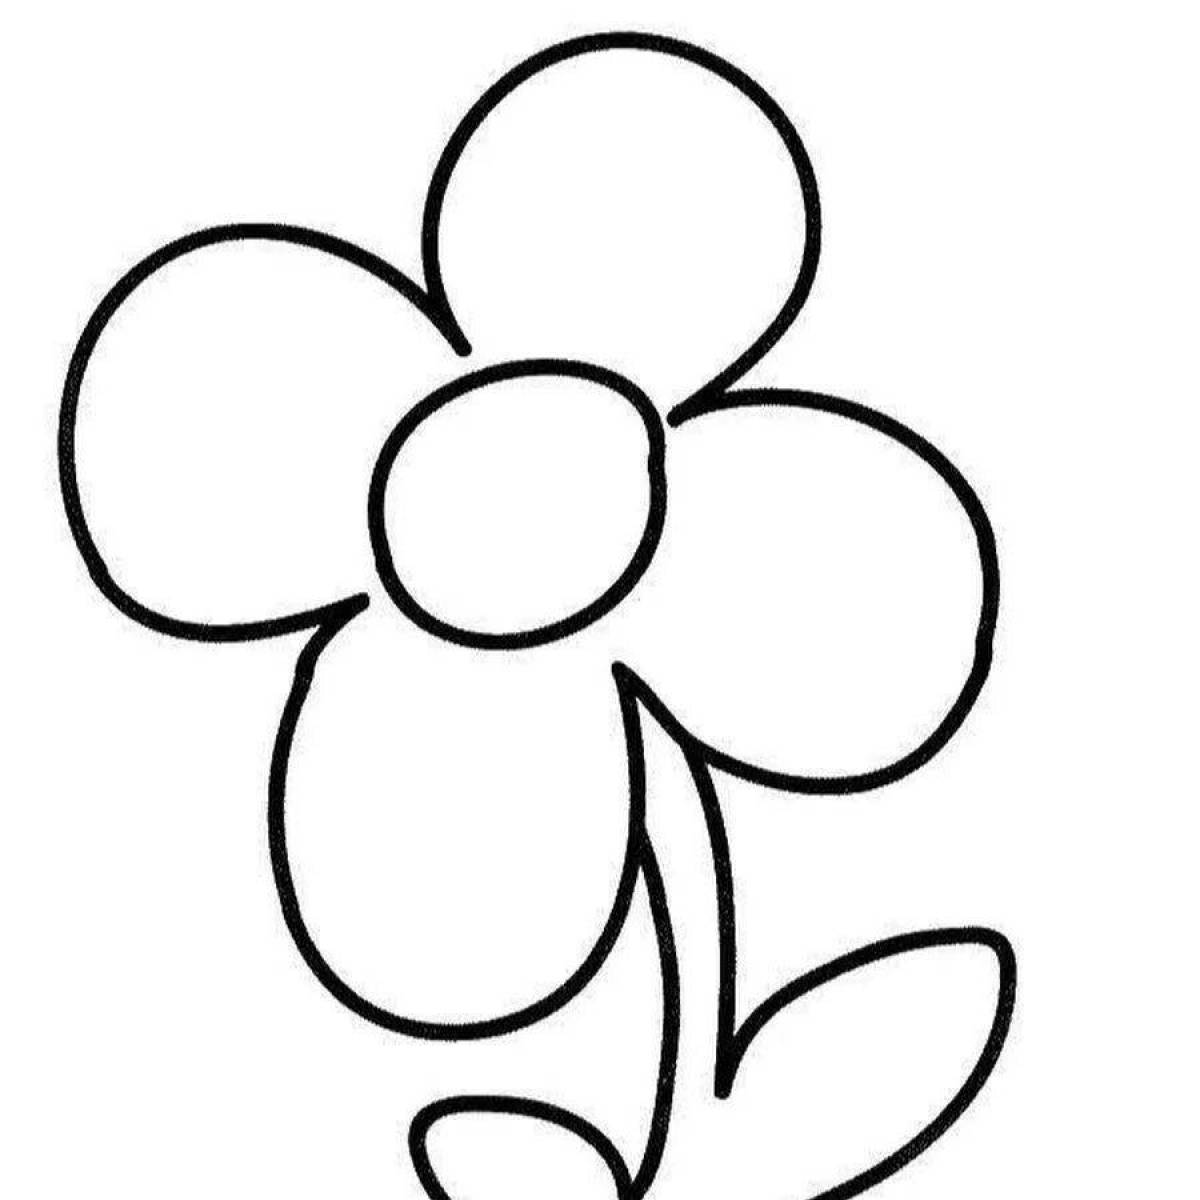 Playful flower coloring page for kids